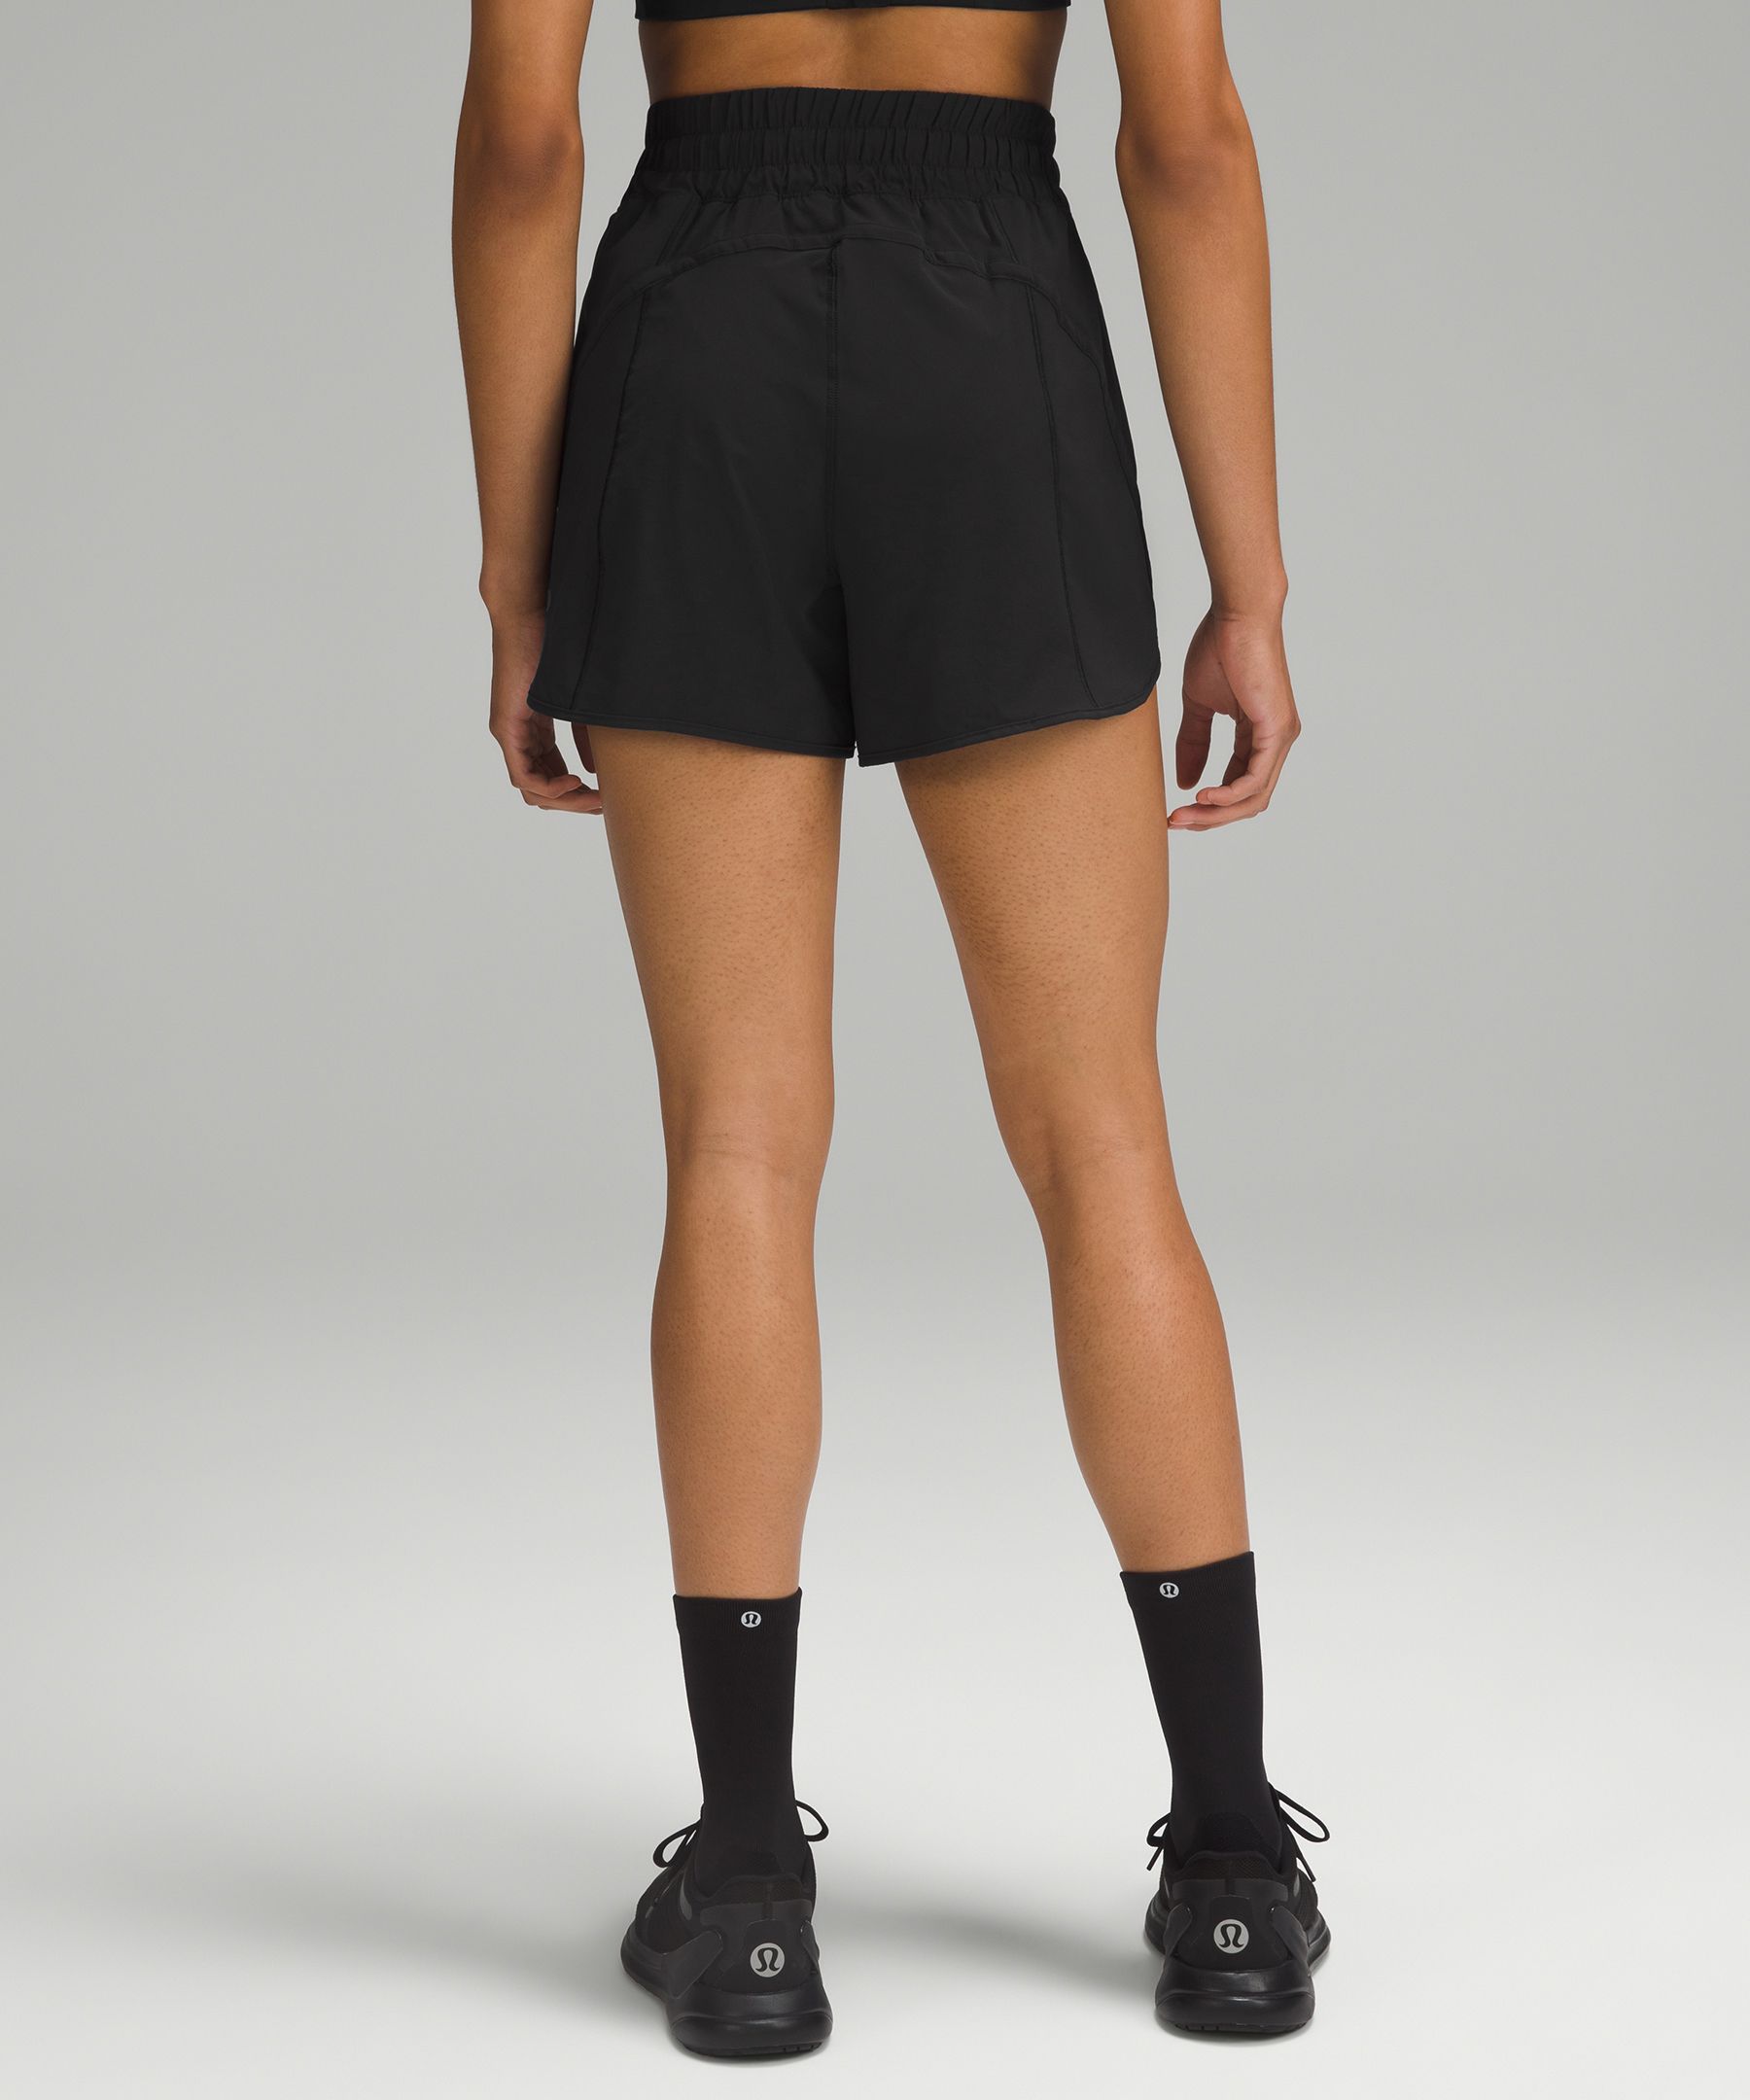 Lululemon Black Track That Shorts No Lining Womens Size 4 - Waist: 13 in  across - $31 - From Adeline